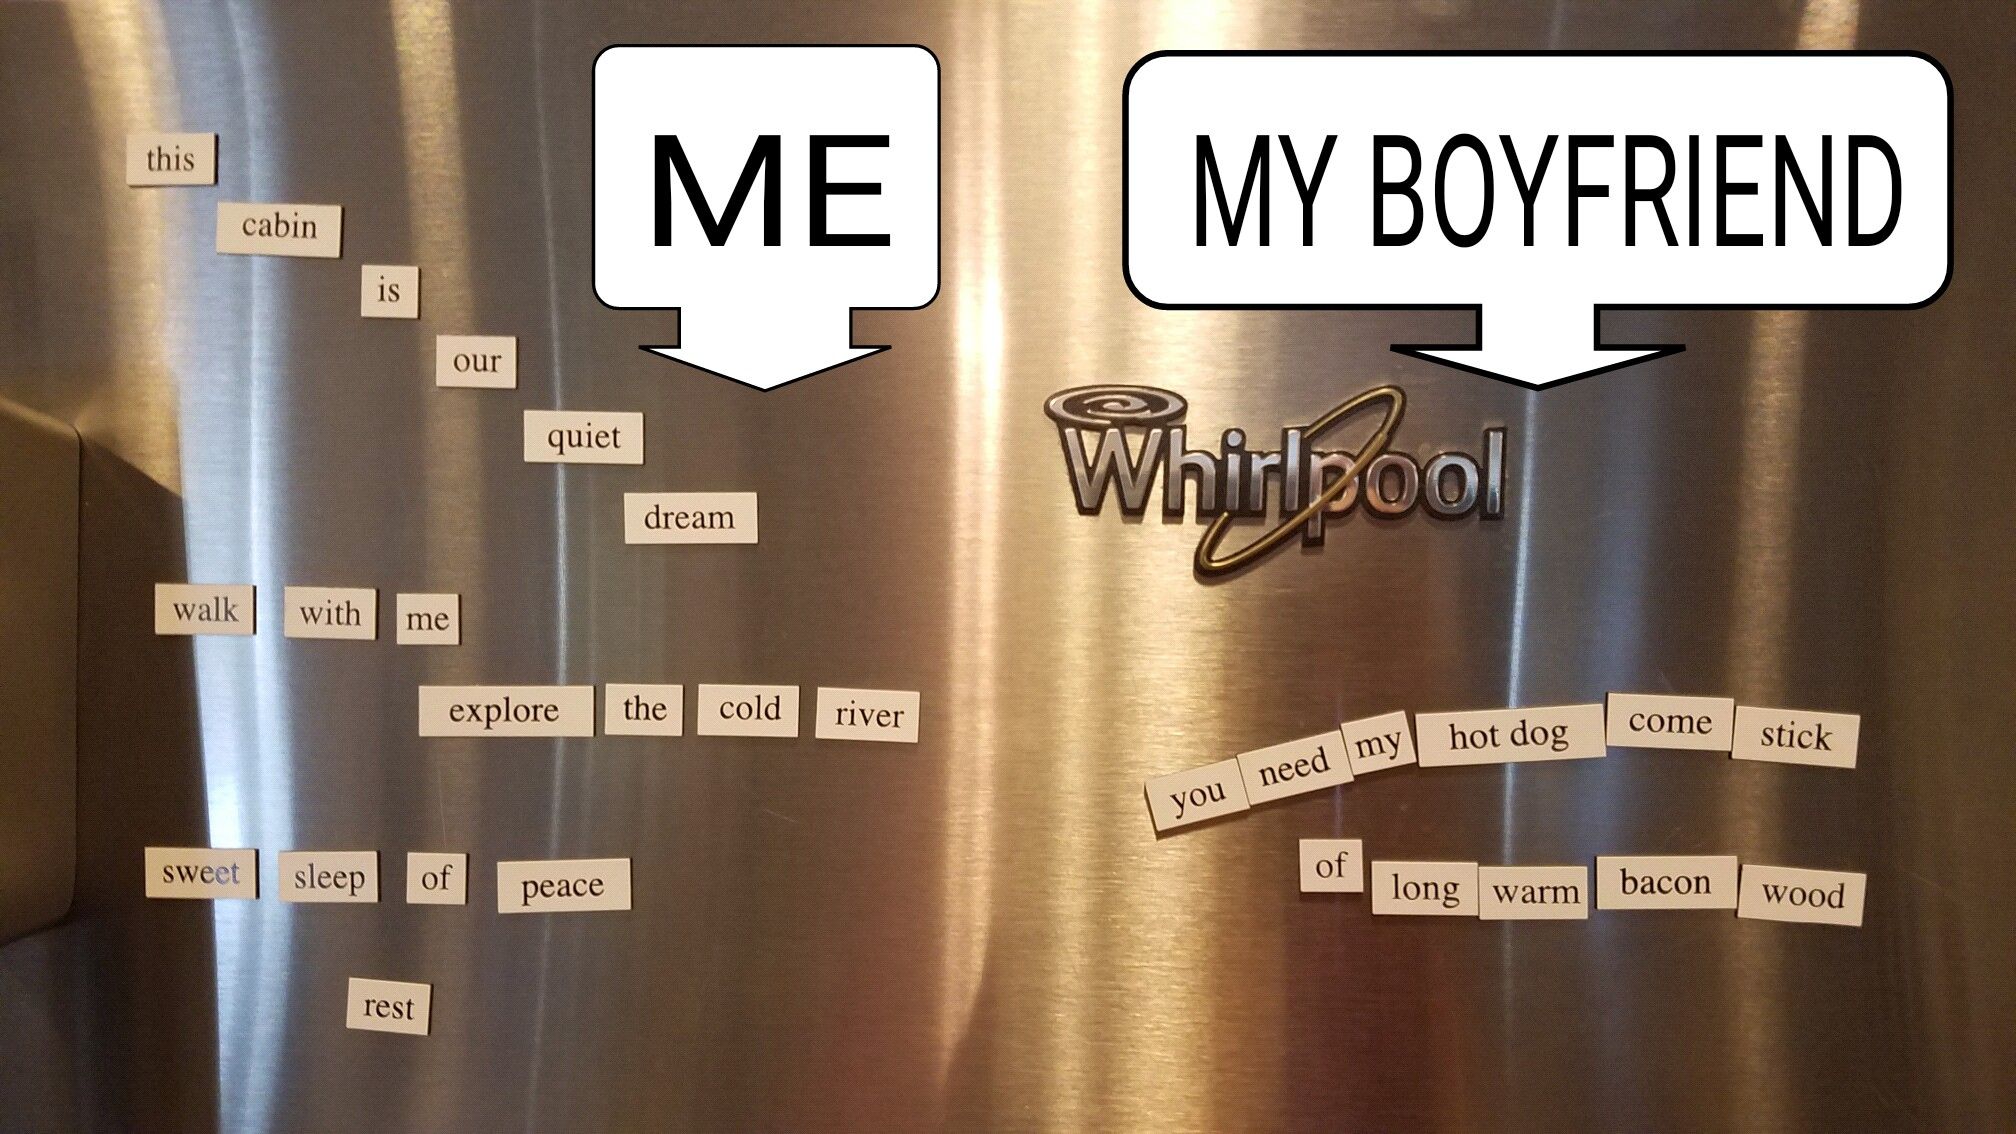 I made the mistake of buying a "romantic" cabin poetry set for our refrigerator.